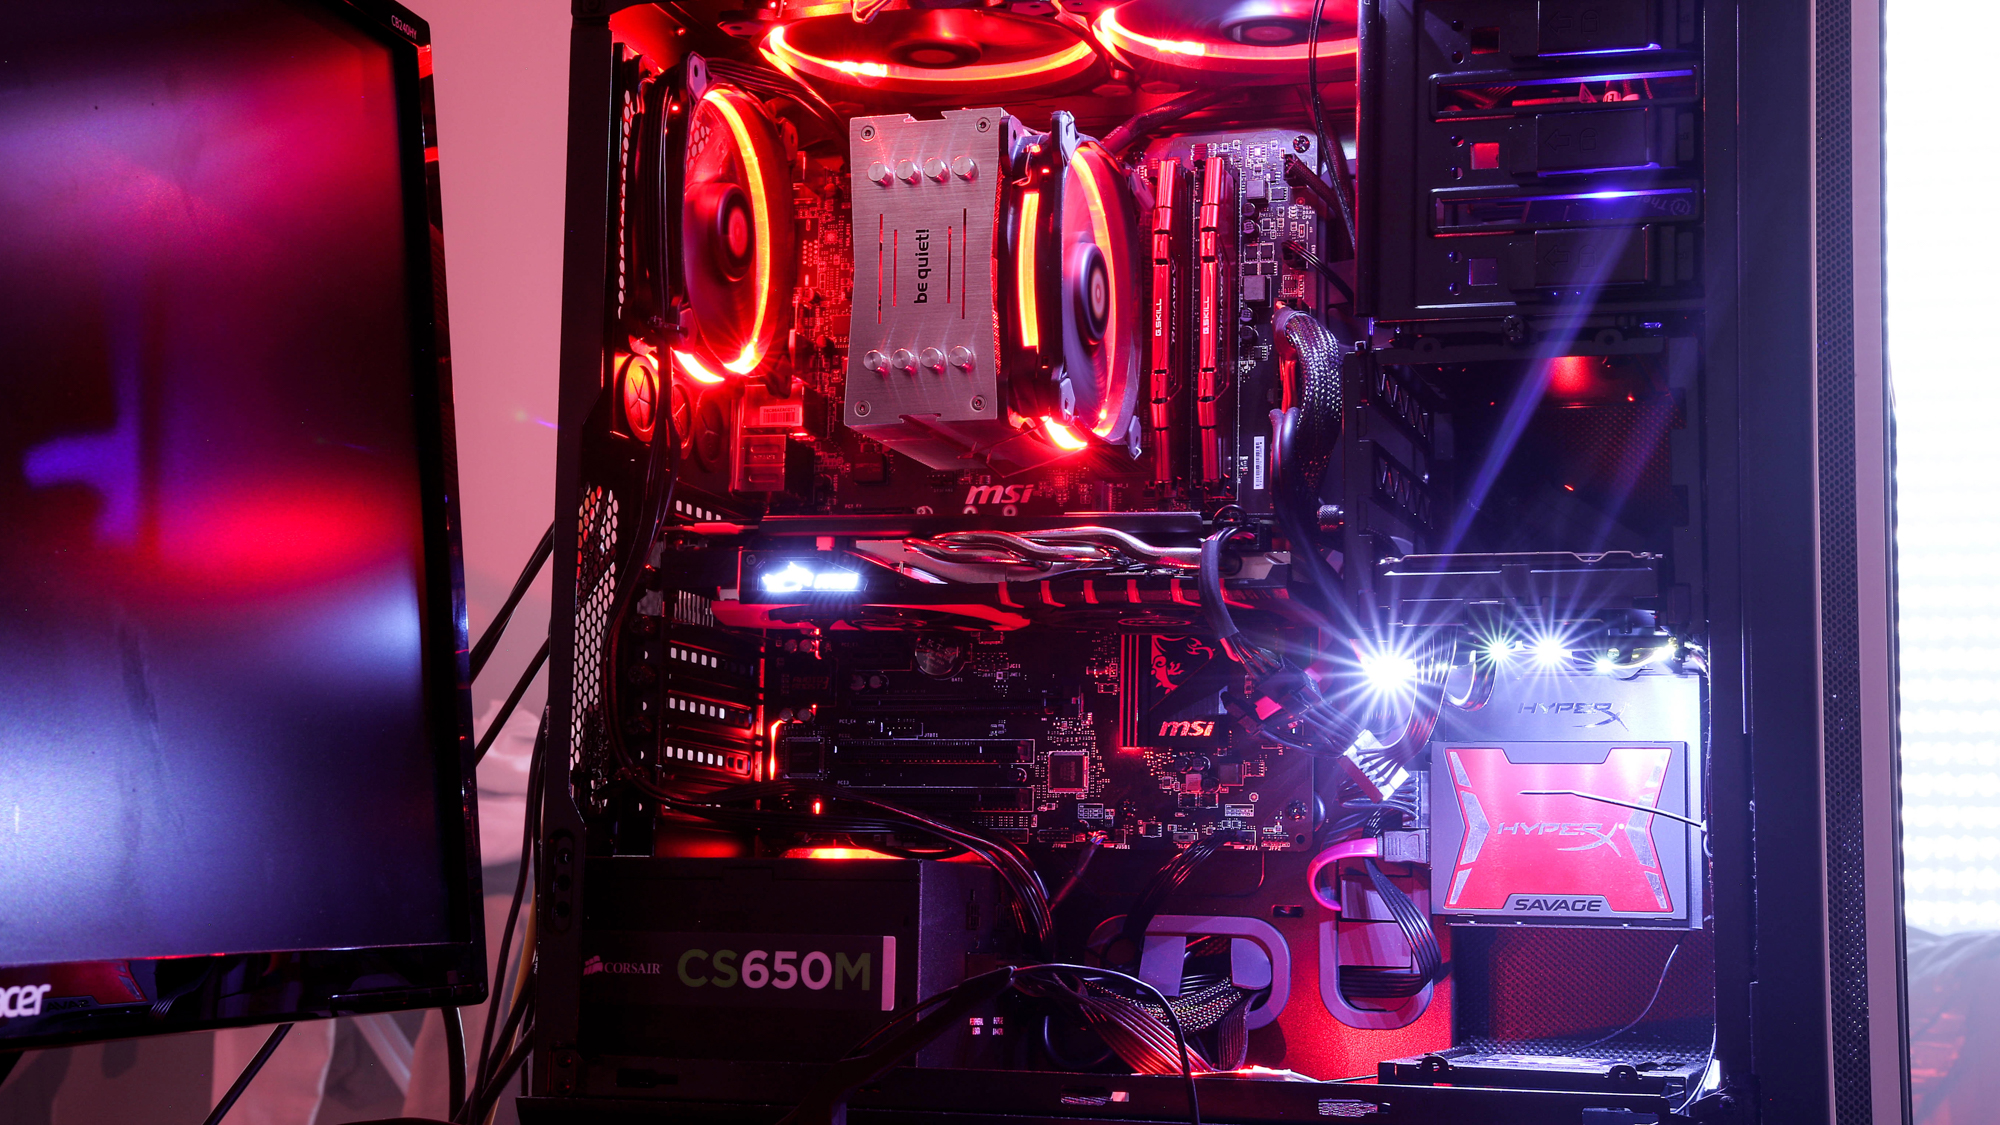 How to build a gaming PC for beginners: All the parts you need